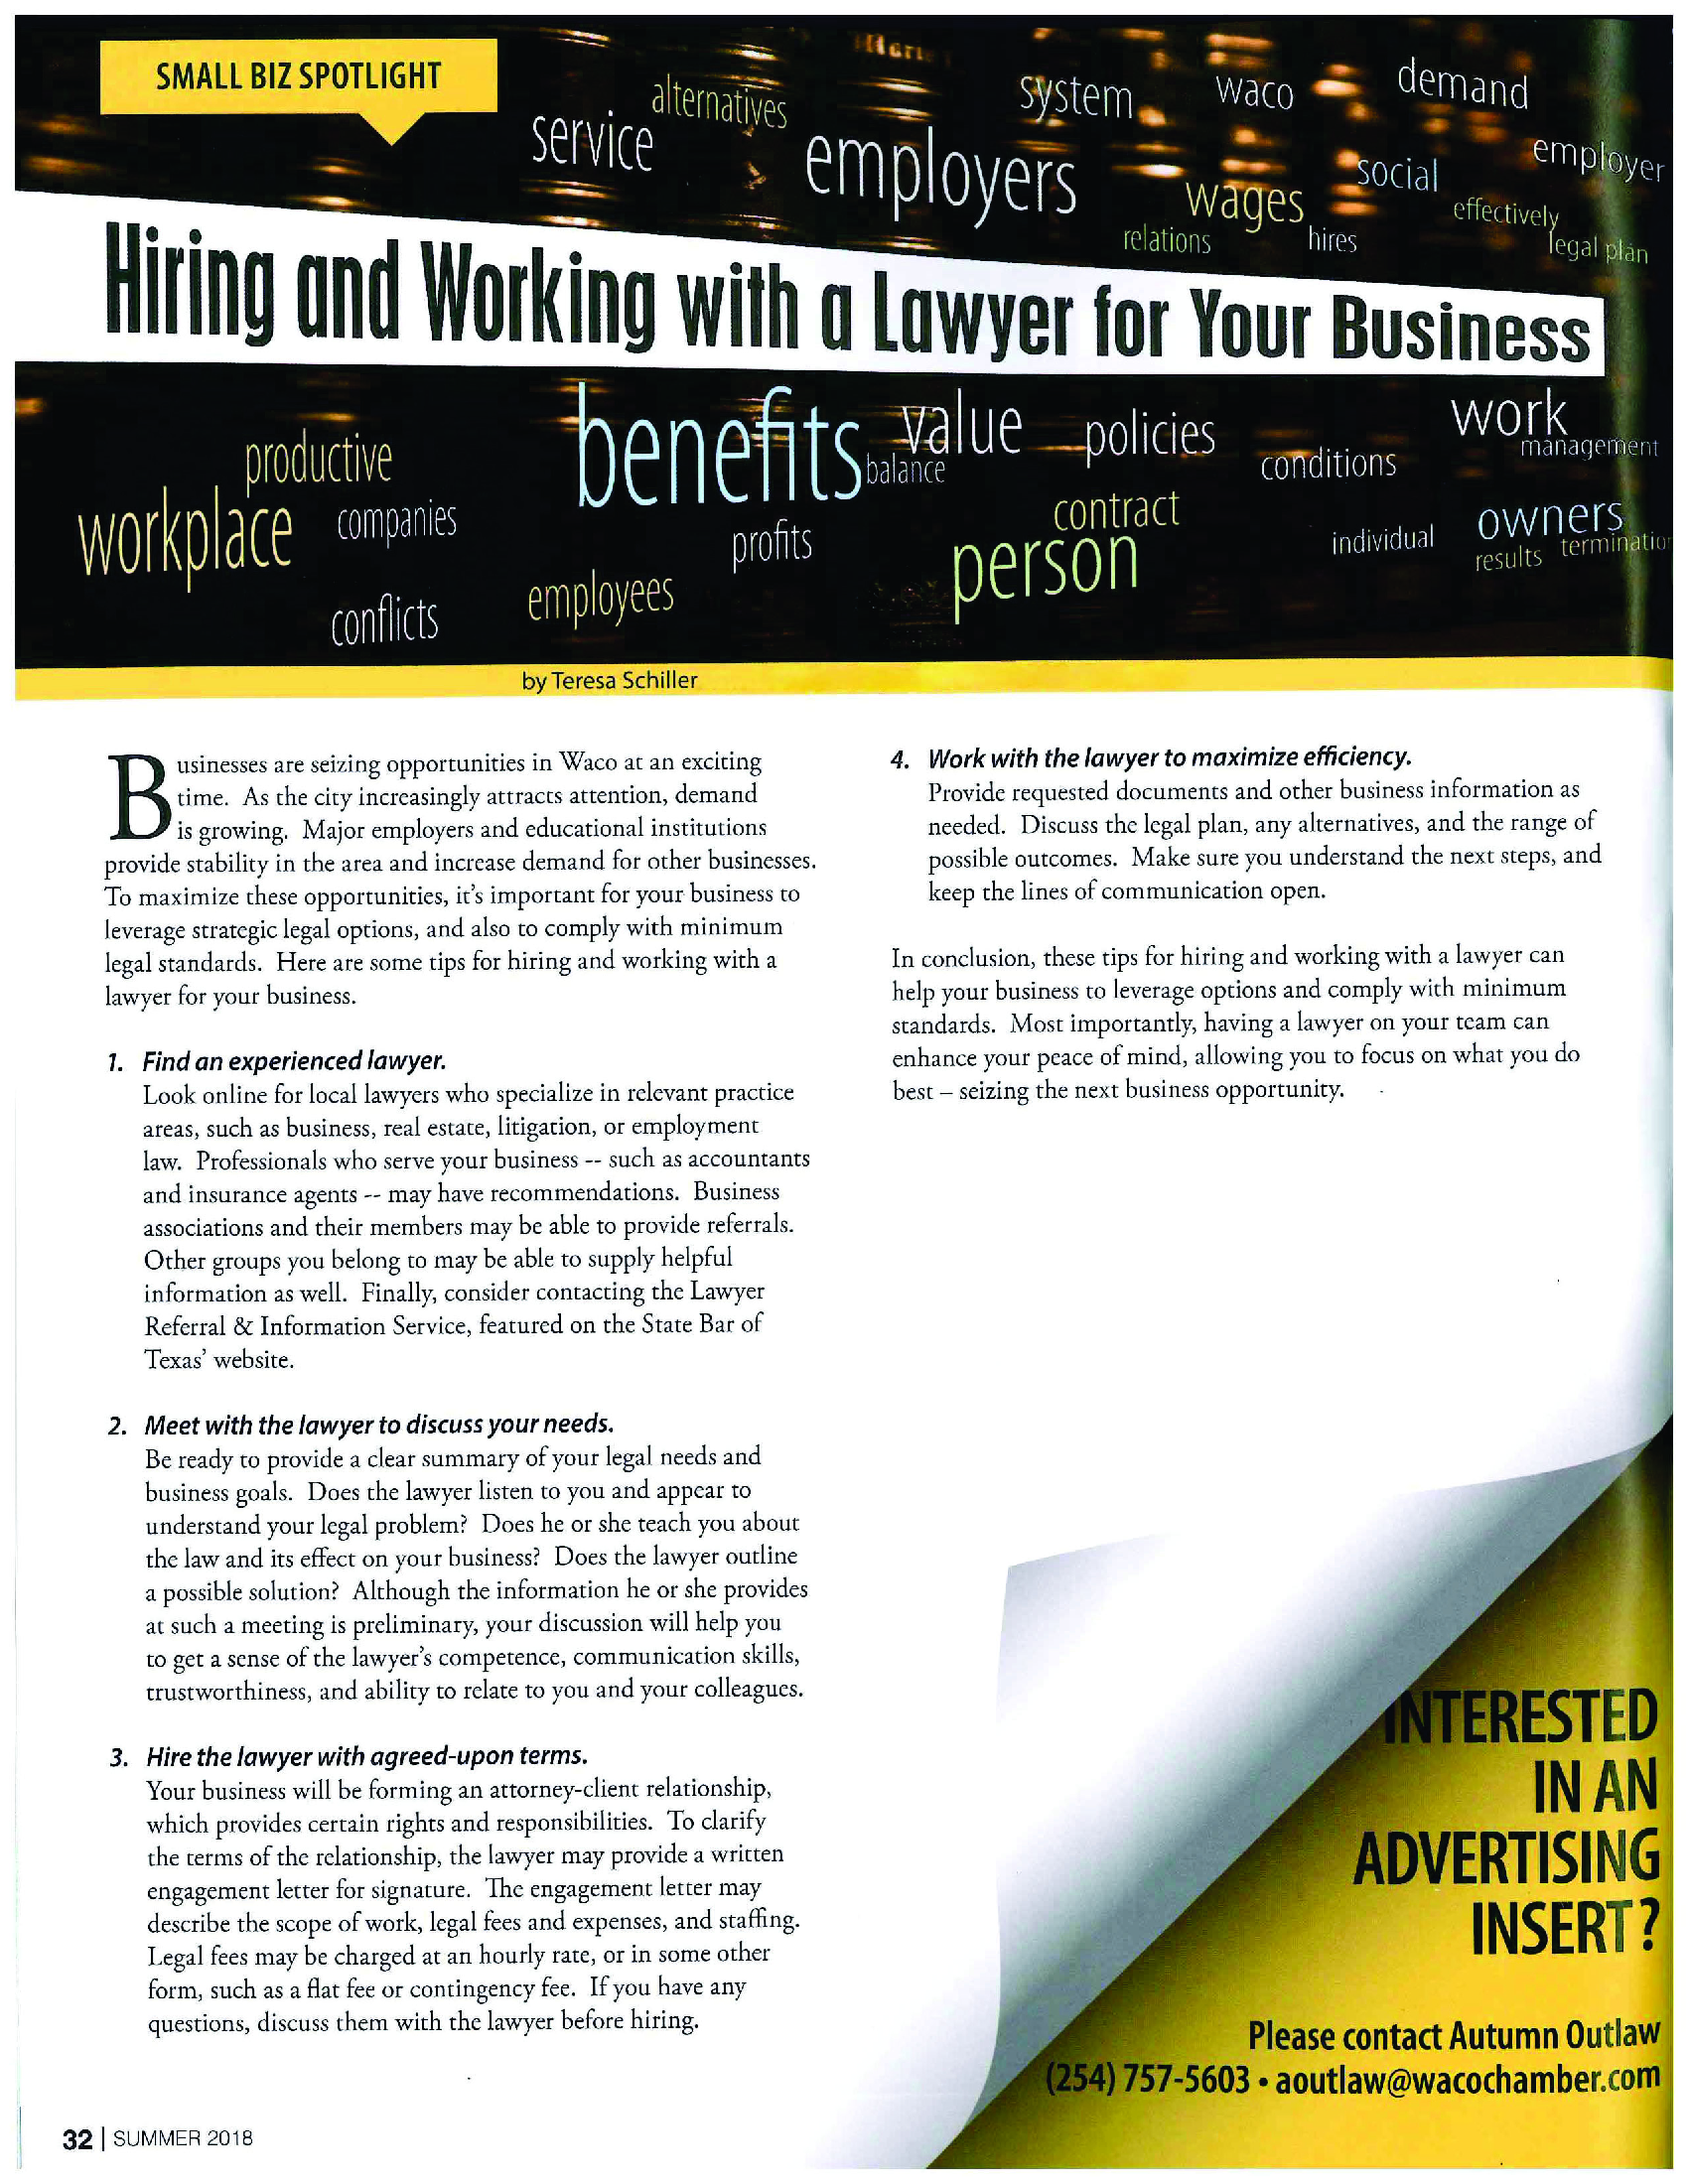 Hiring and Working with a Lawyer for Your Business